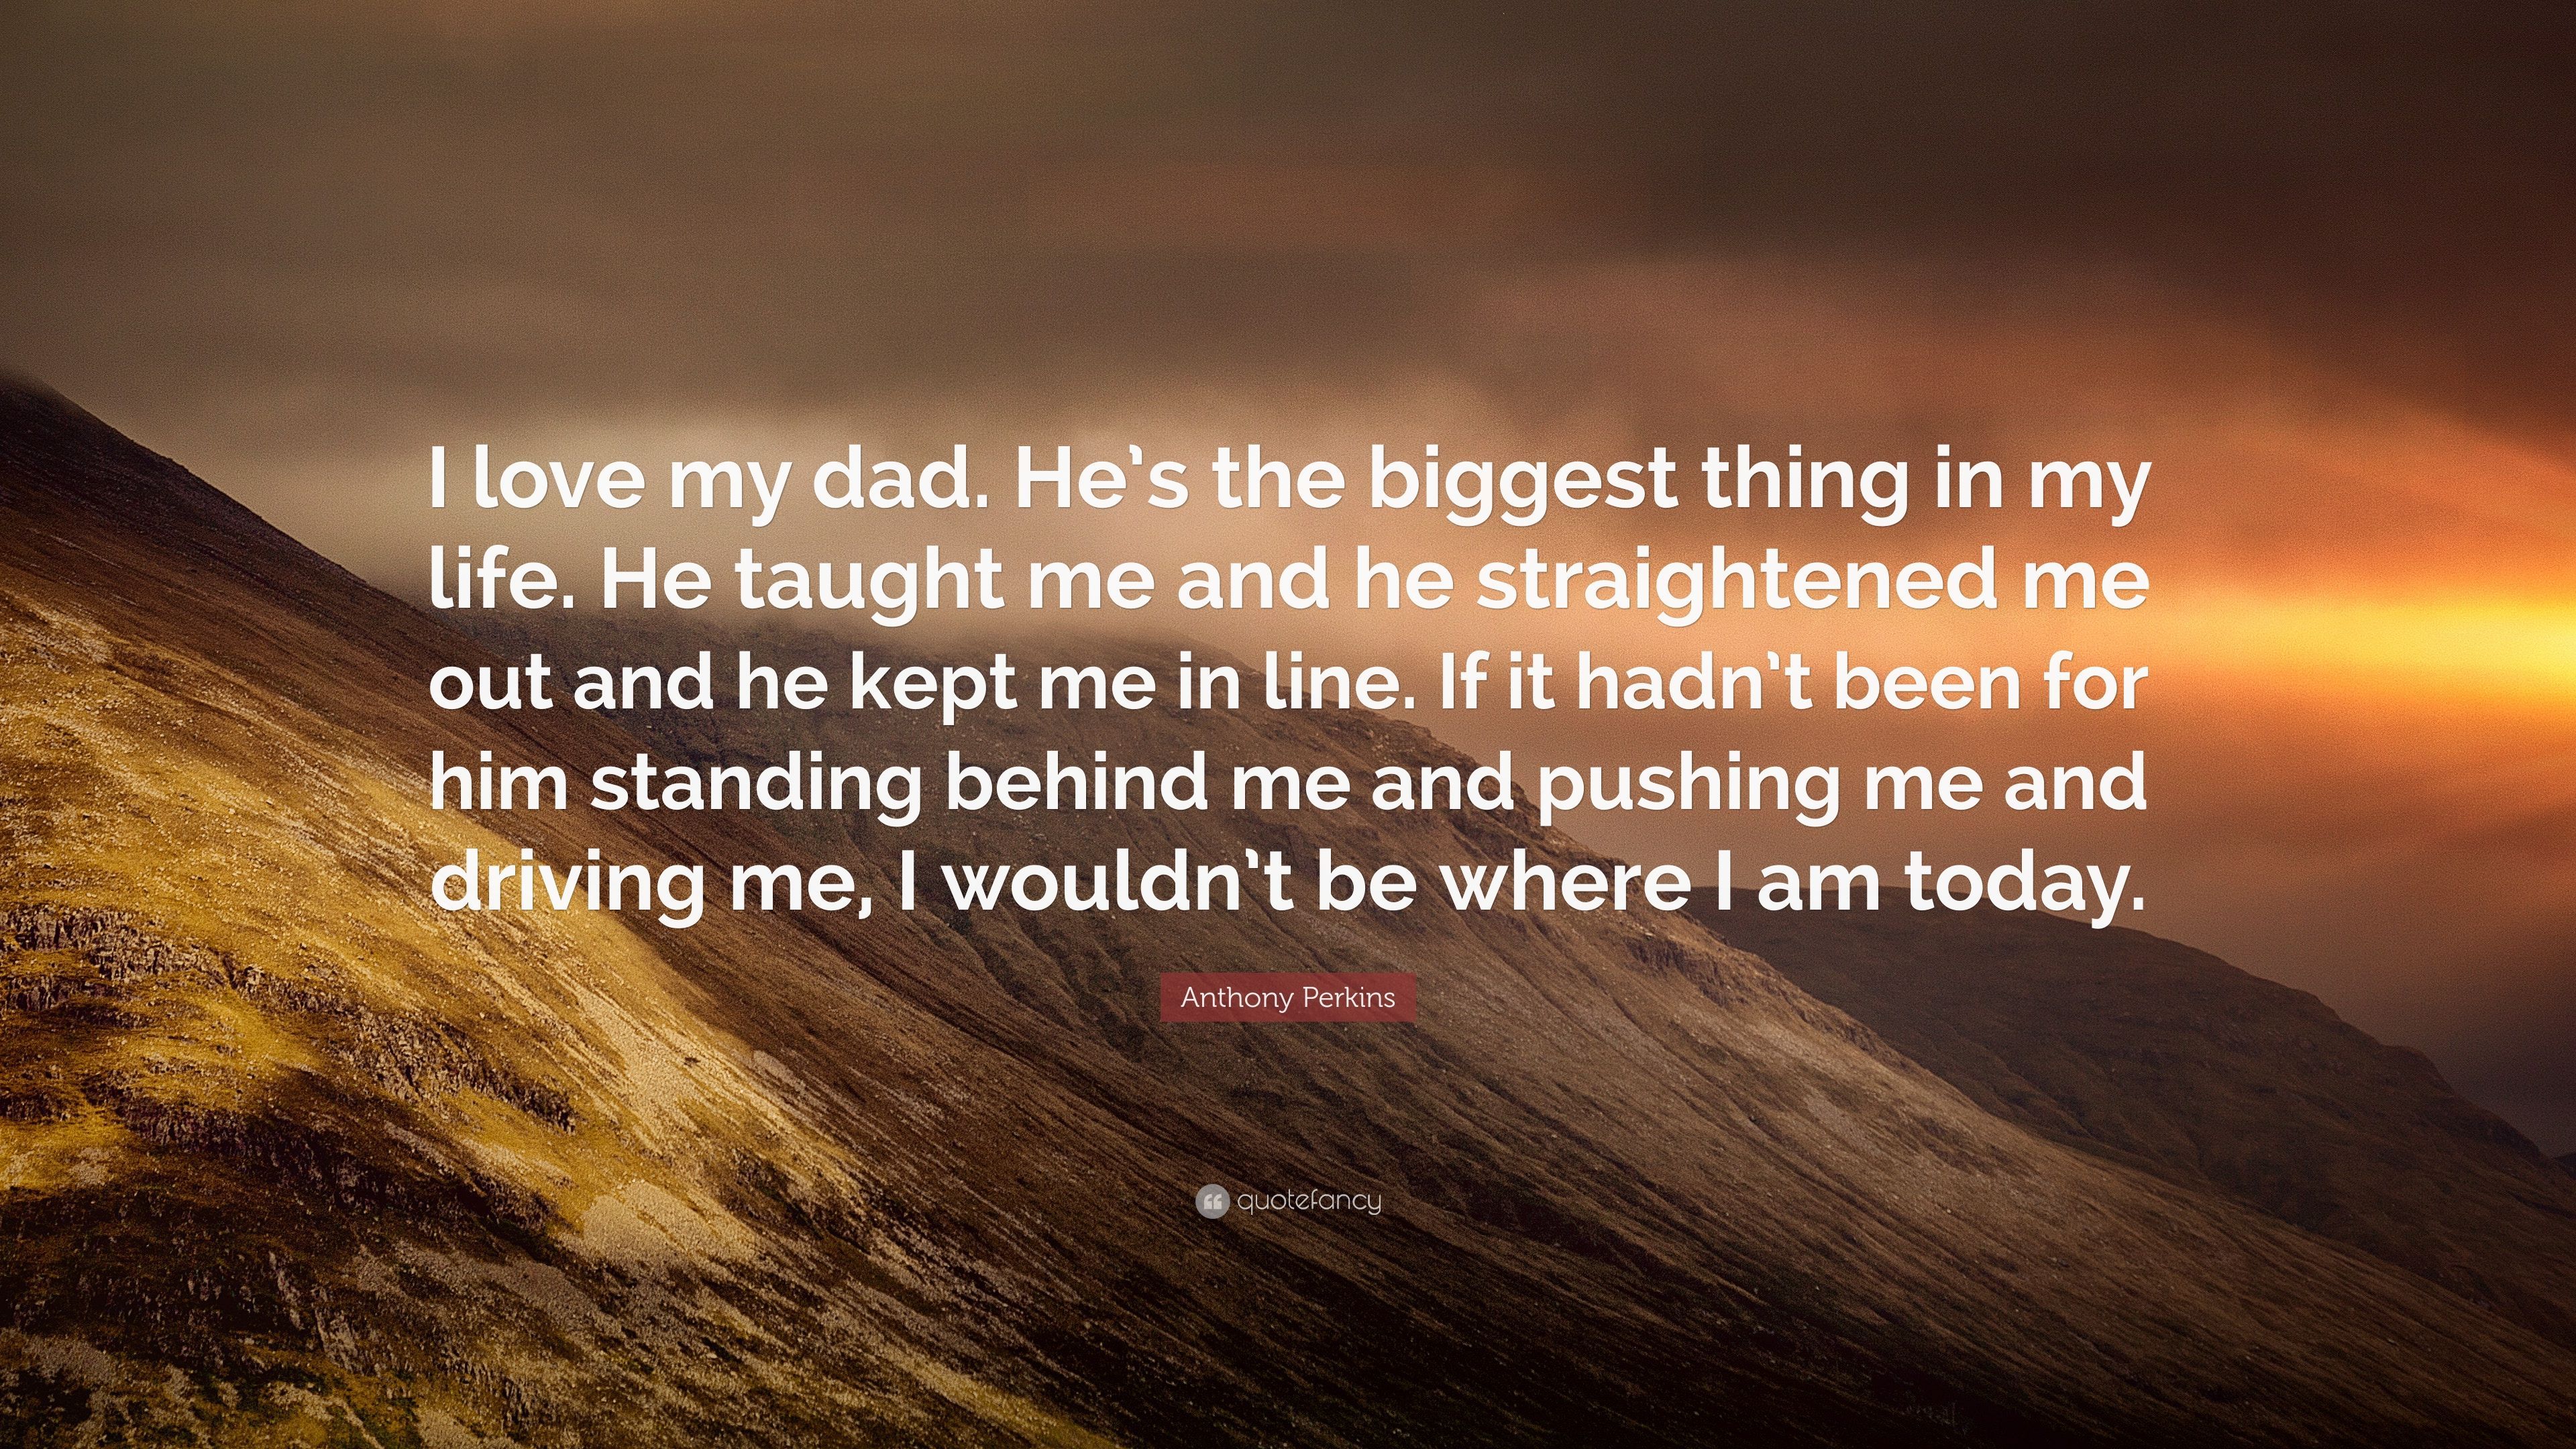 Anthony Perkins Quote: “I love my dad. He's the biggest thing in my